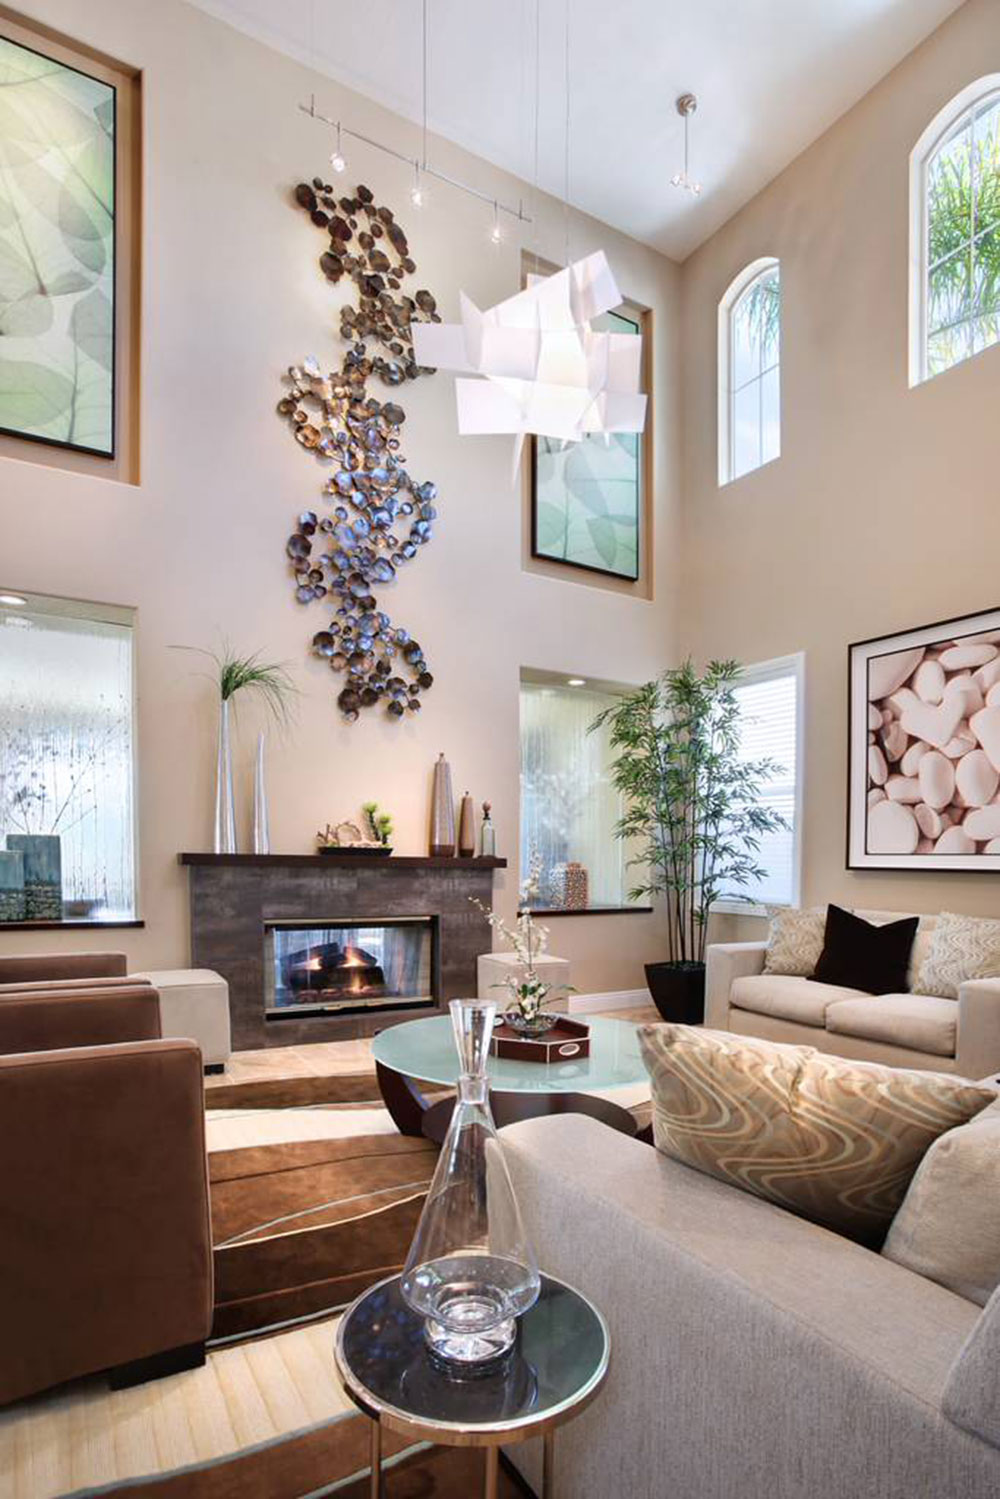 Living Room Ideas With High Ceilings | www.cintronbeveragegroup.com